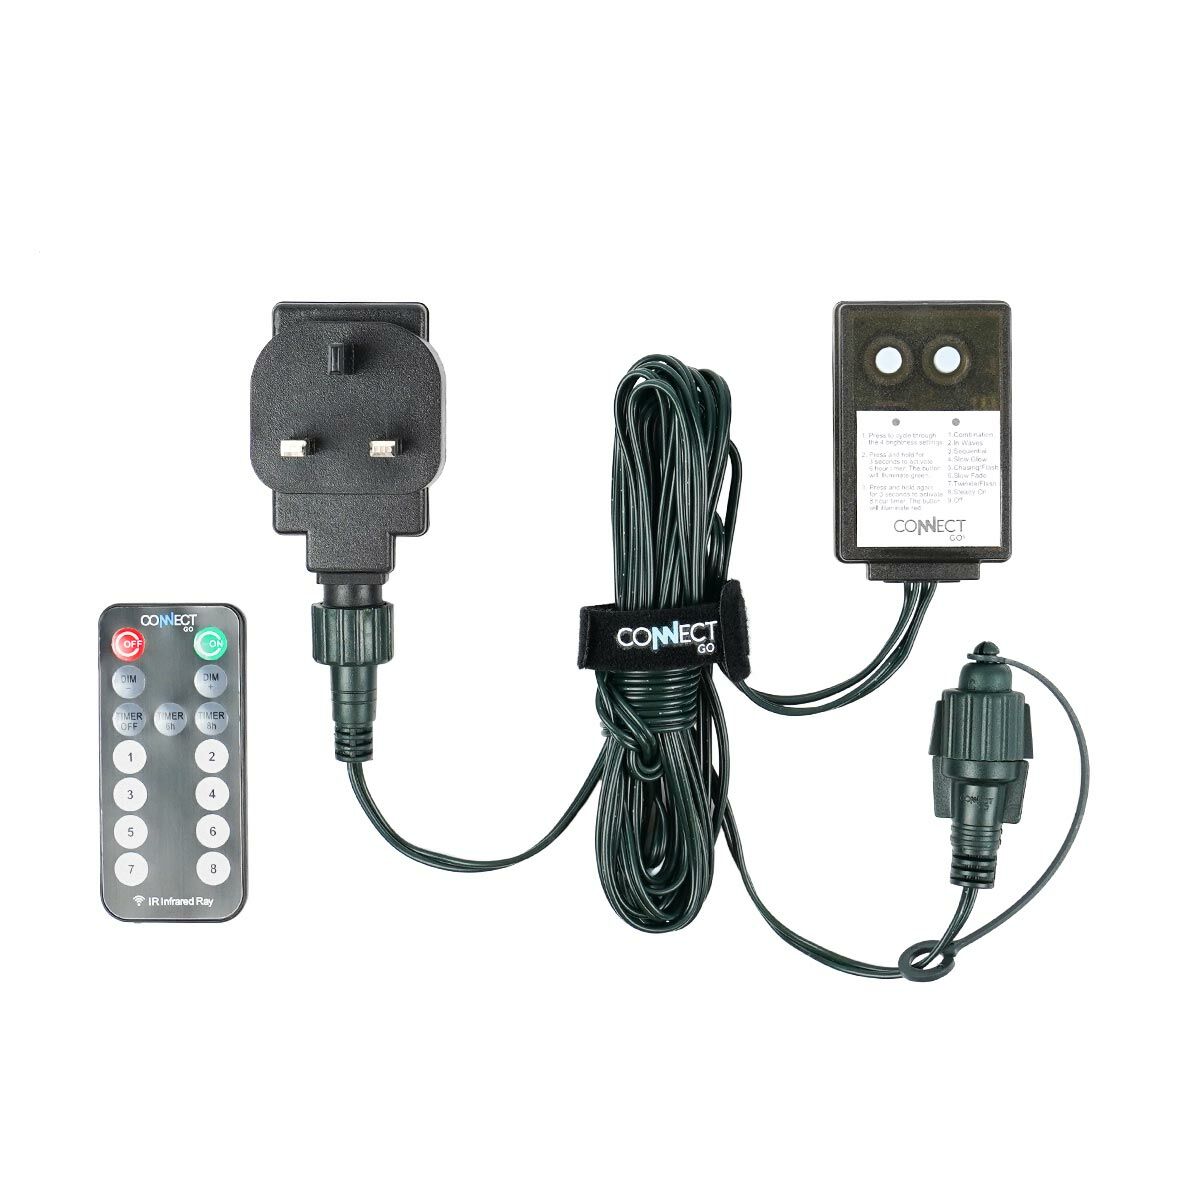 Connectable Outdoor Lighting Power Cable with Remote Control